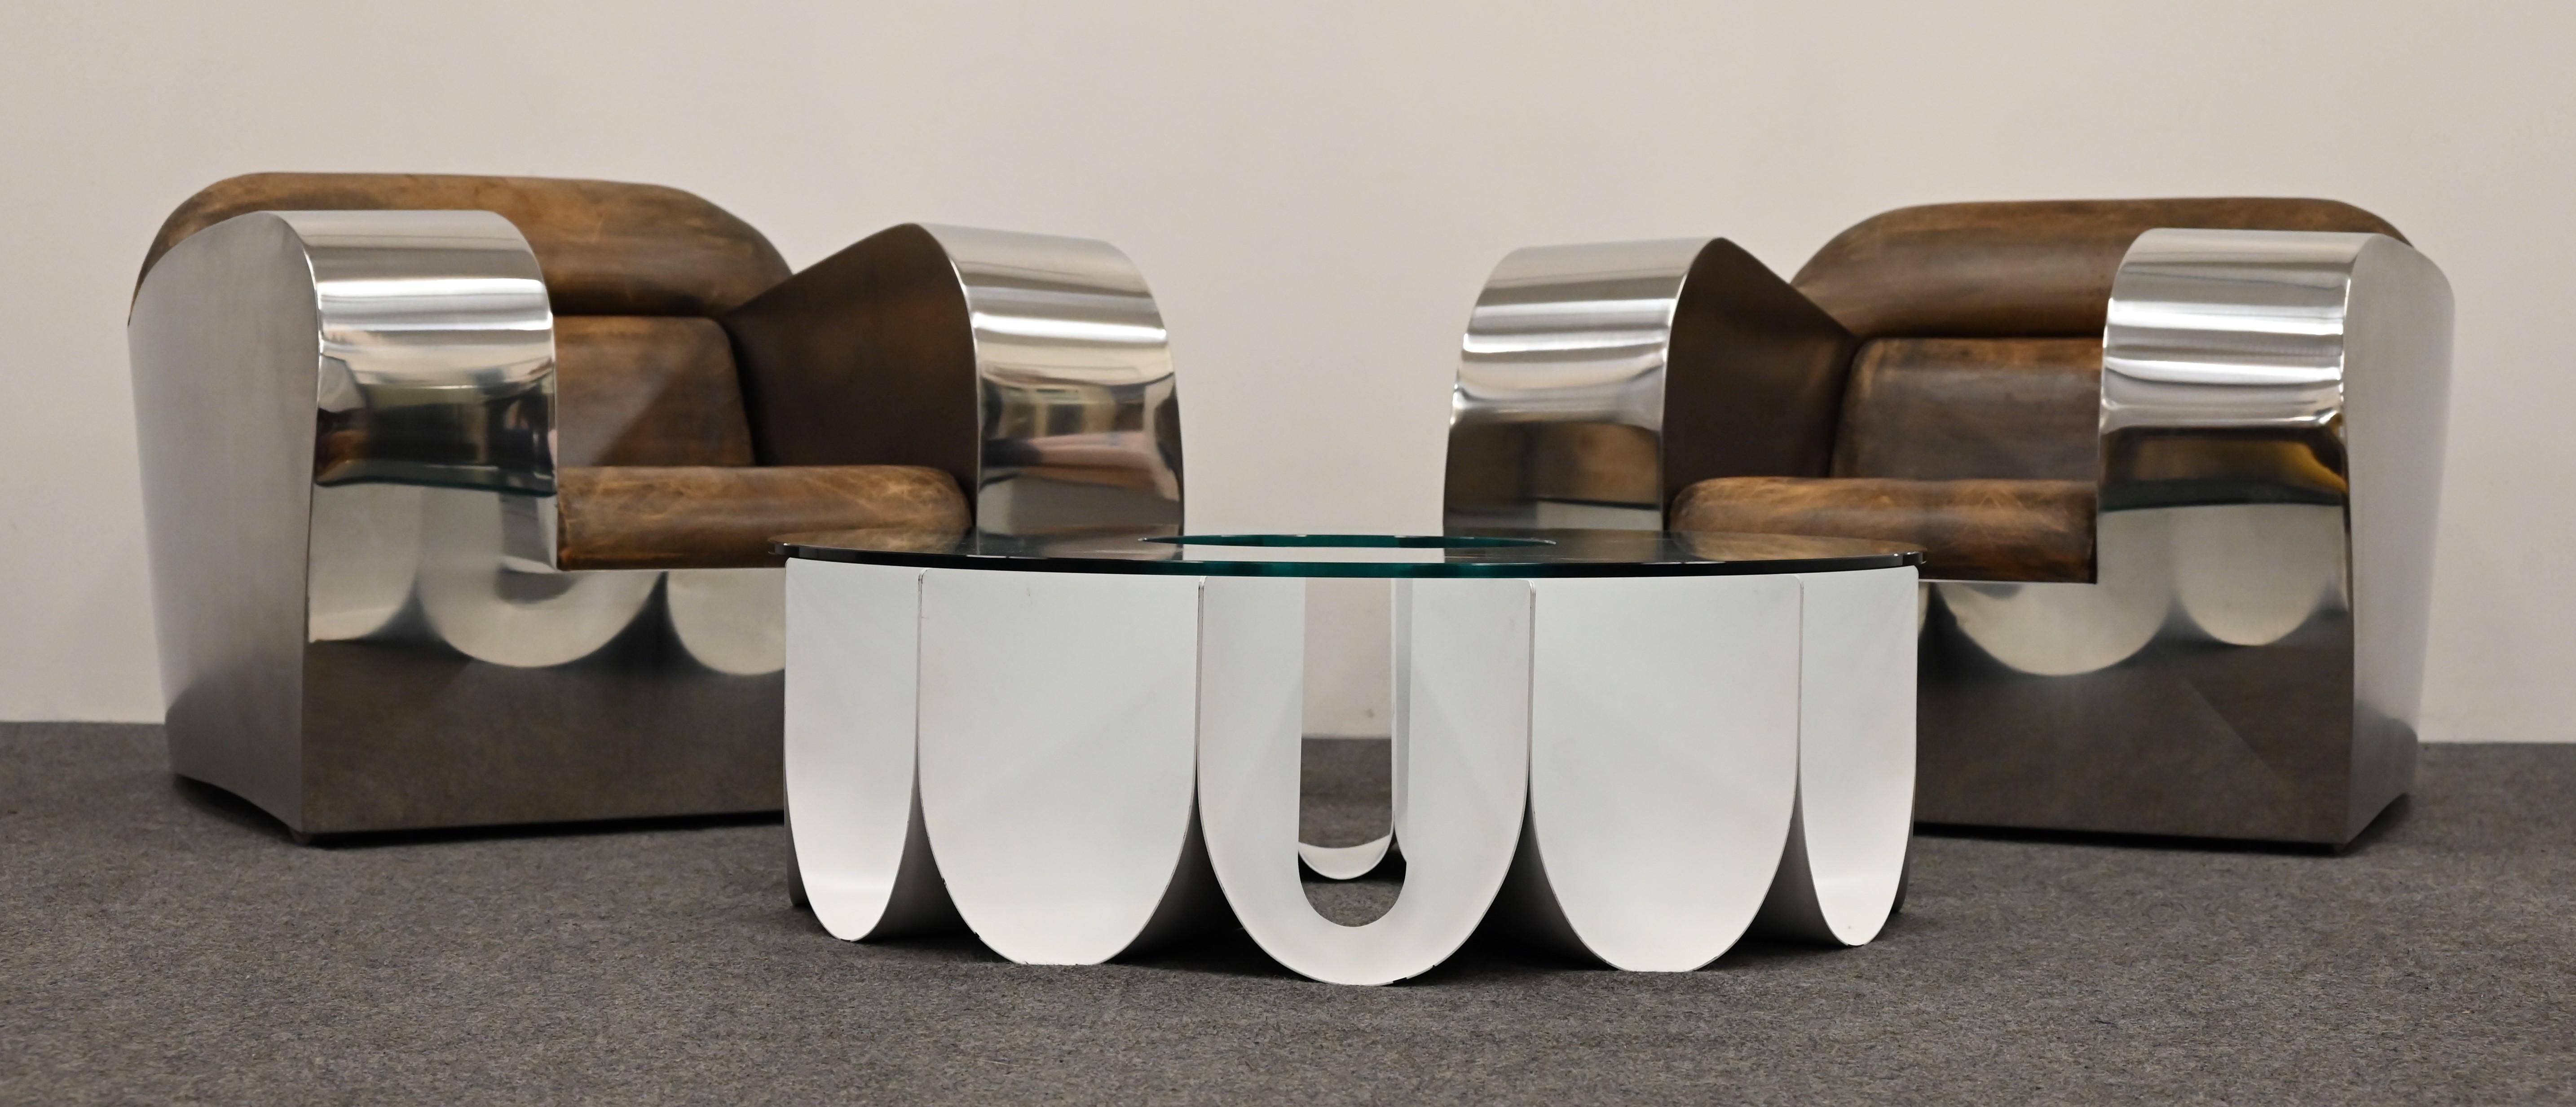 Pair of Stainless Steel Club Chairs by Jonathan Singleton, 20th Century For Sale 2